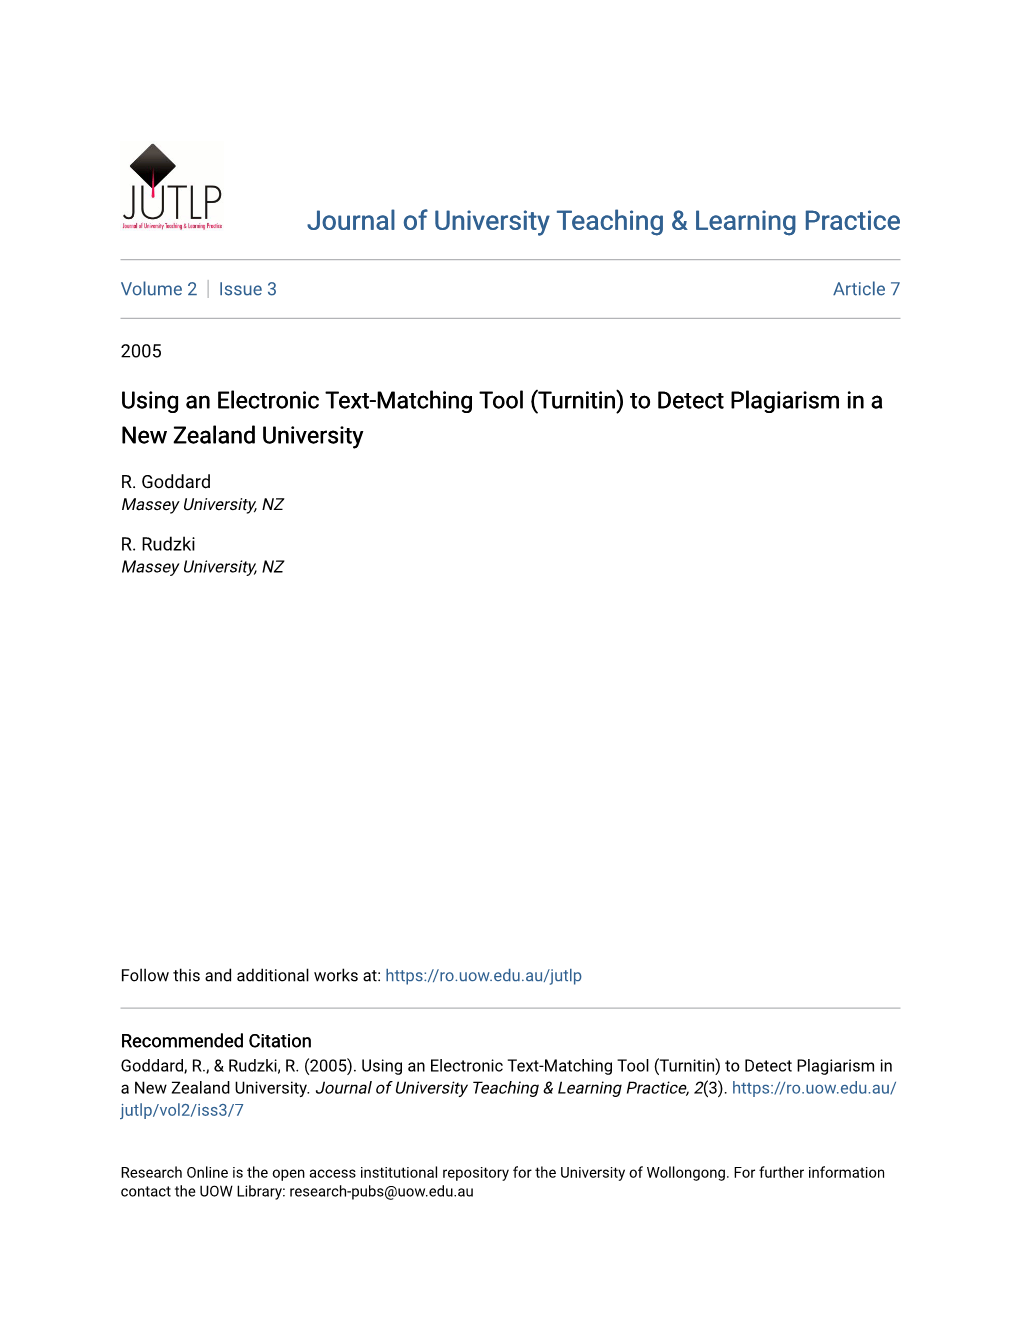 Using an Electronic Text-Matching Tool (Turnitin) to Detect Plagiarism in a New Zealand University